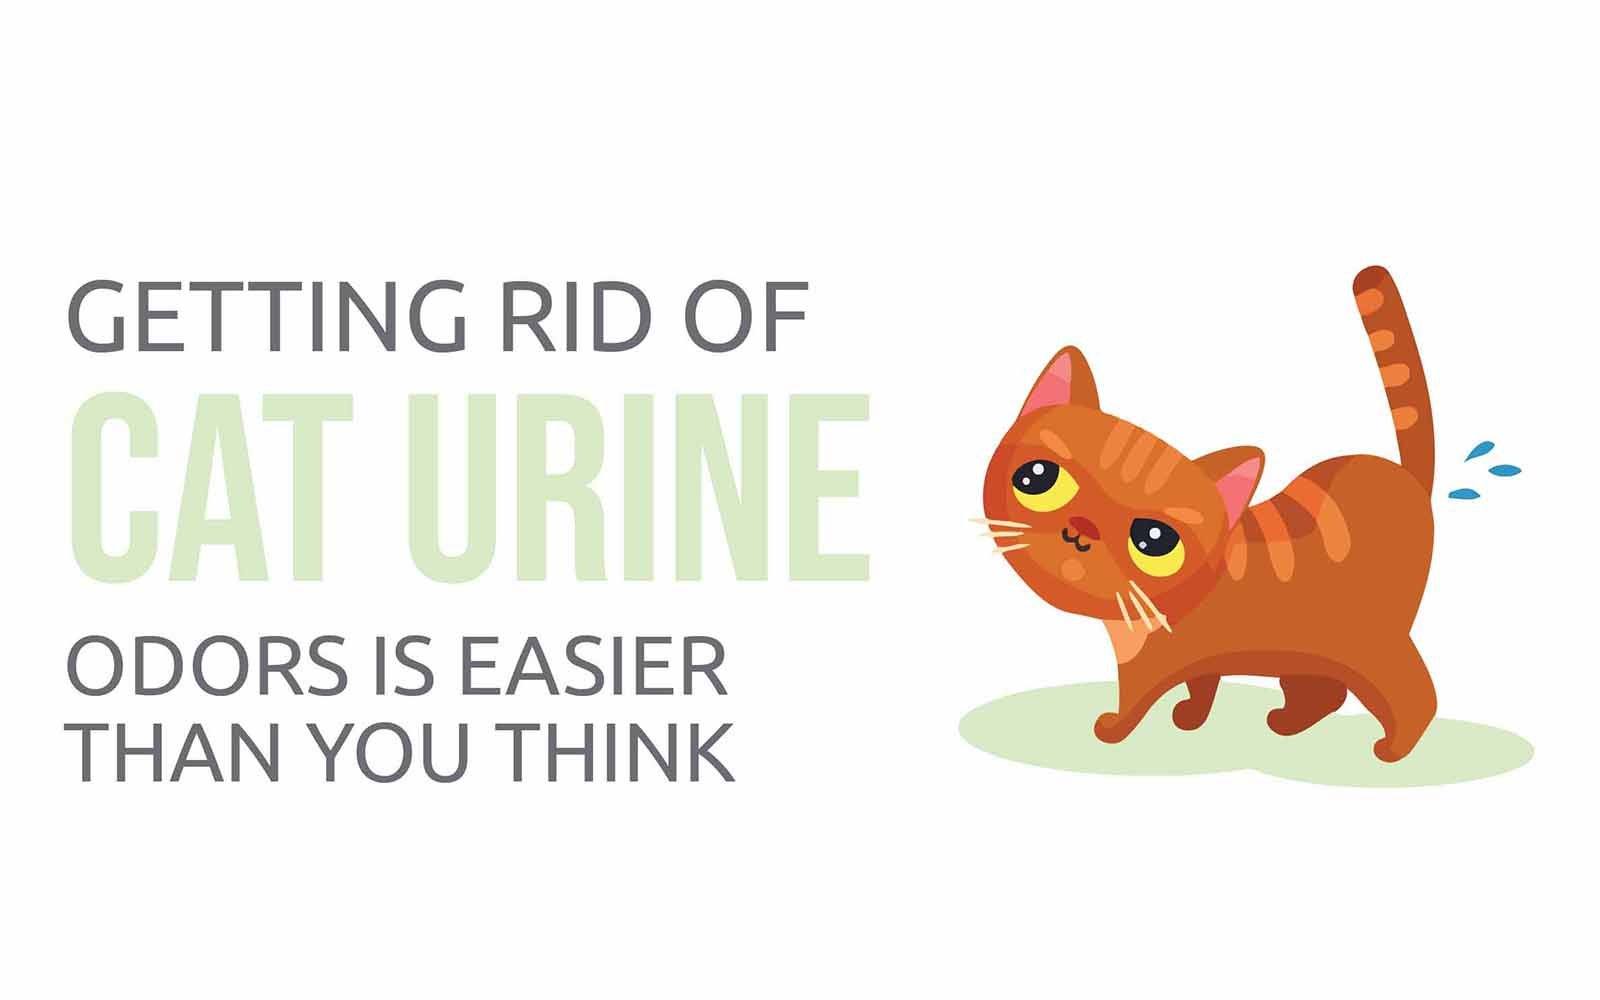 Getting Rid of Cat Urine Odors is Easier Than You Think